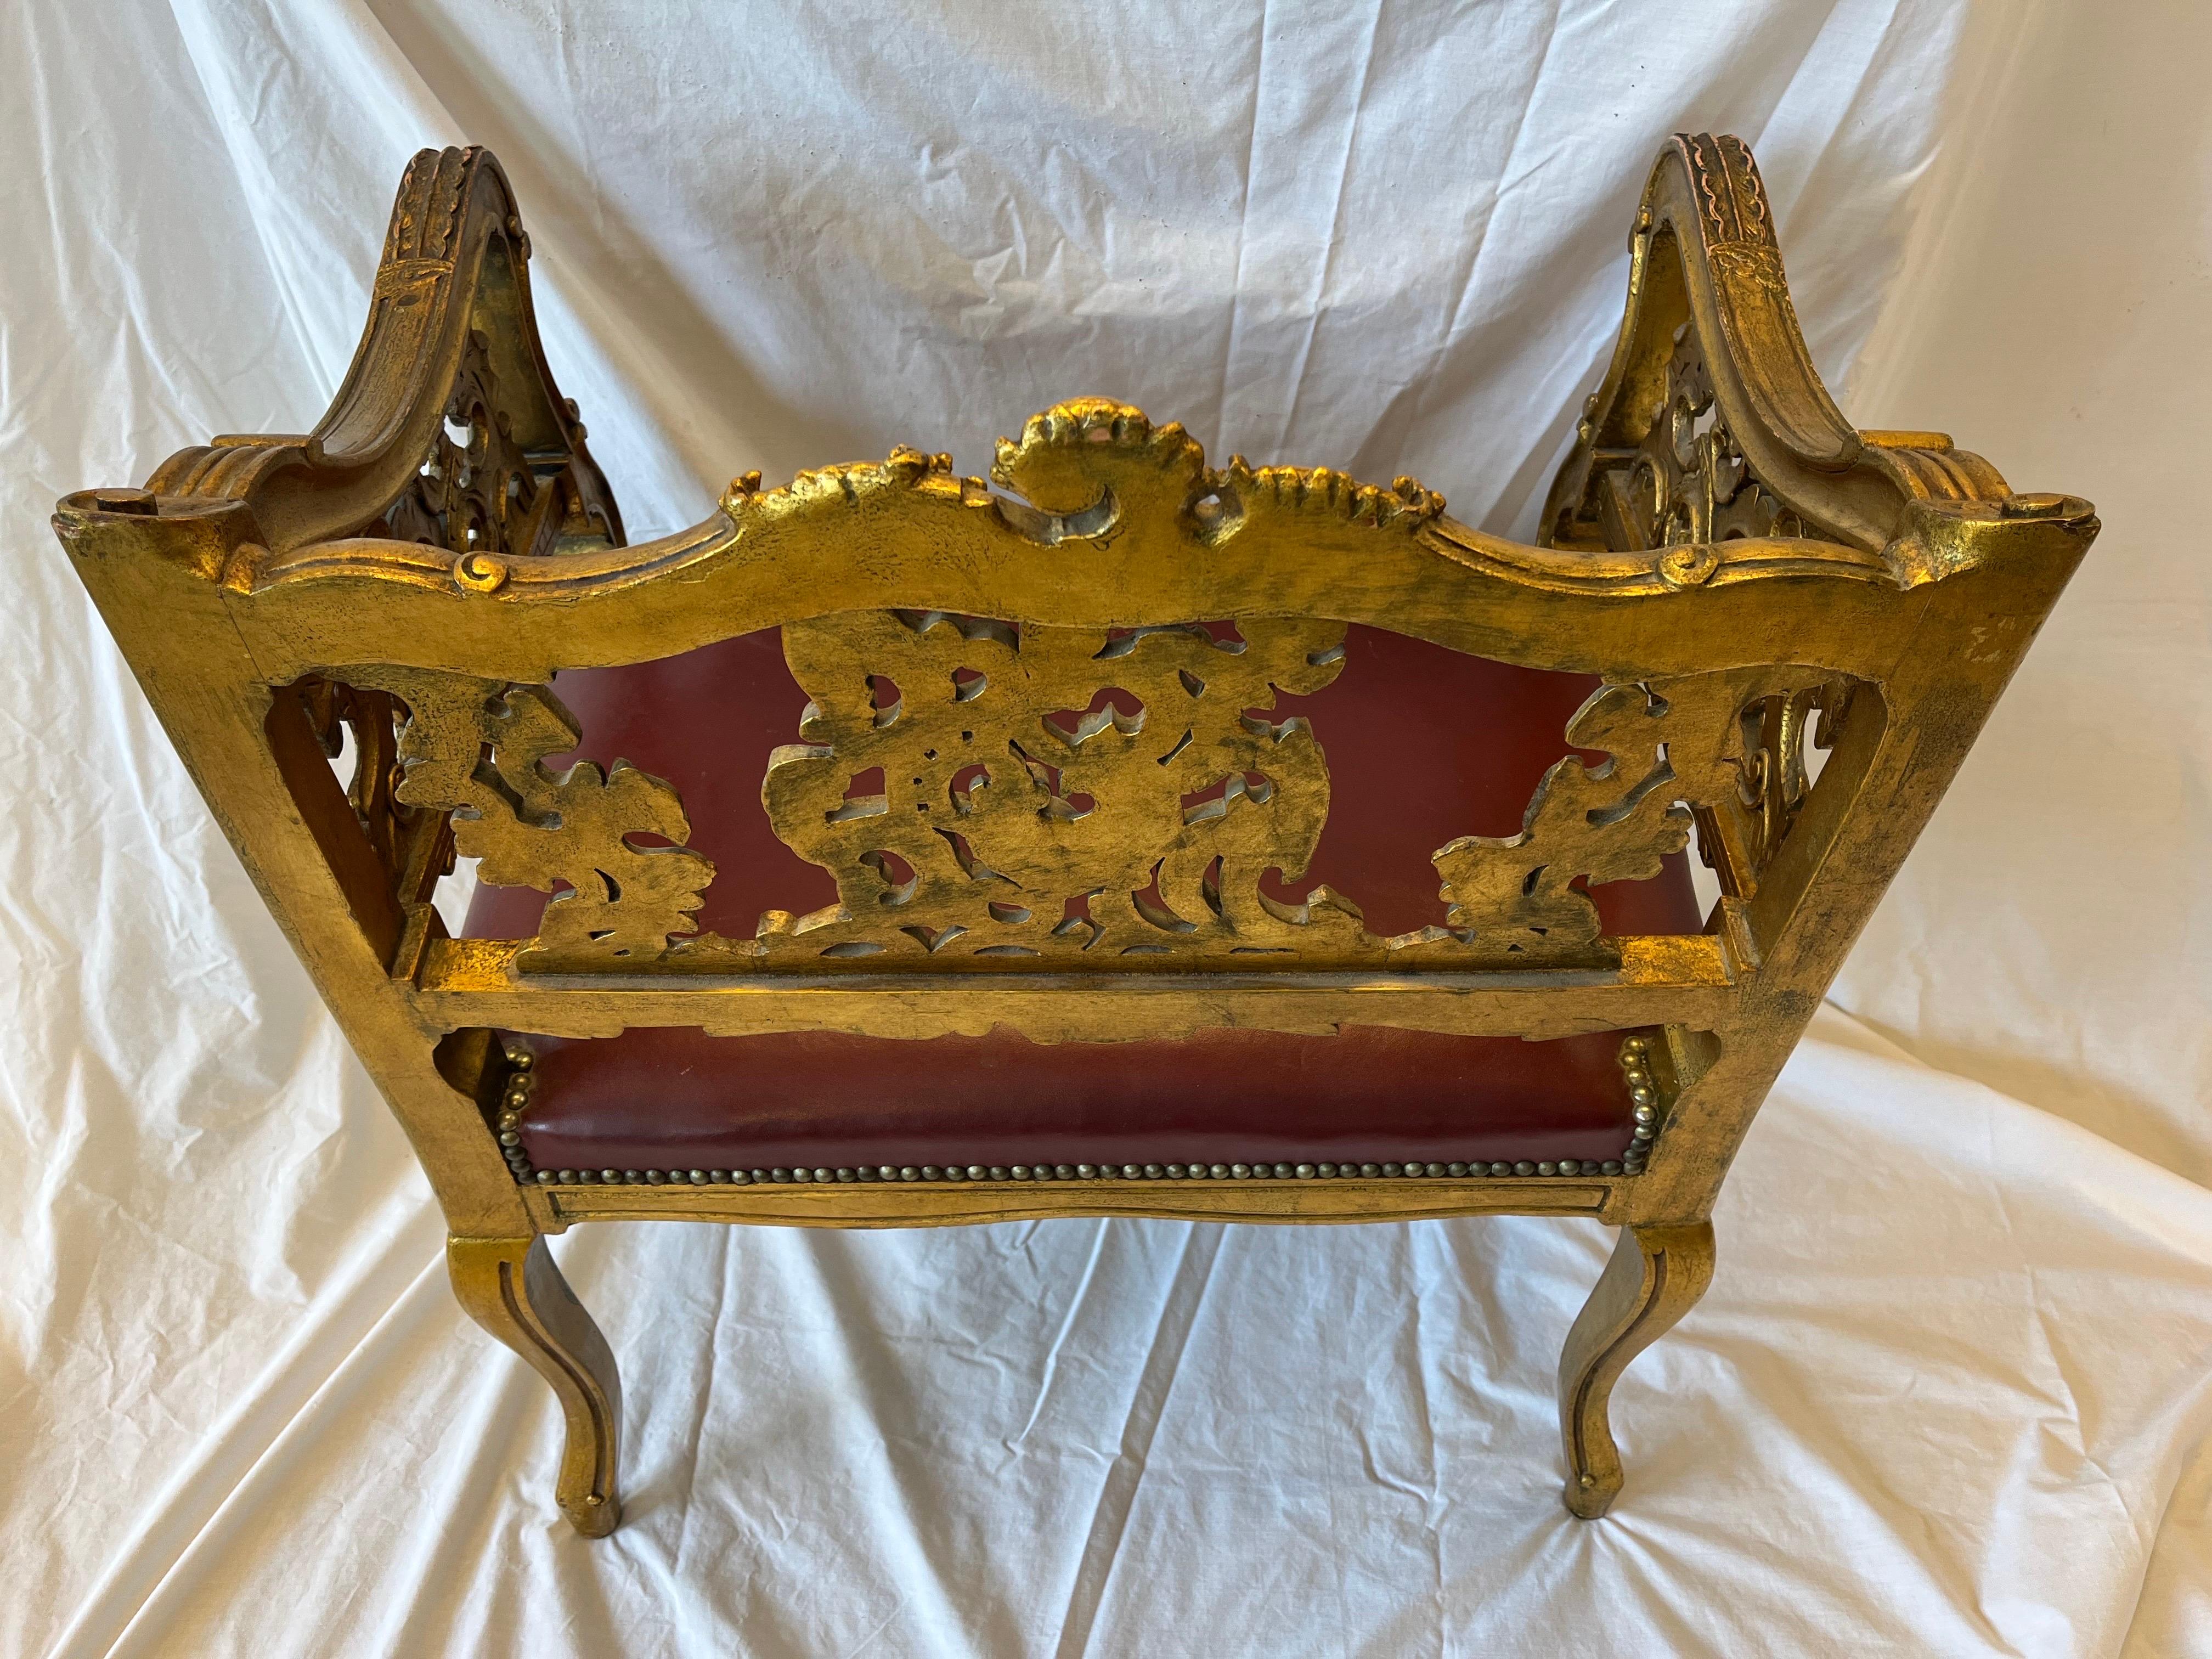 Antique Carved and Gilt Wood Arm Chair Bench Ornate Design Red Upholstered Seat For Sale 9